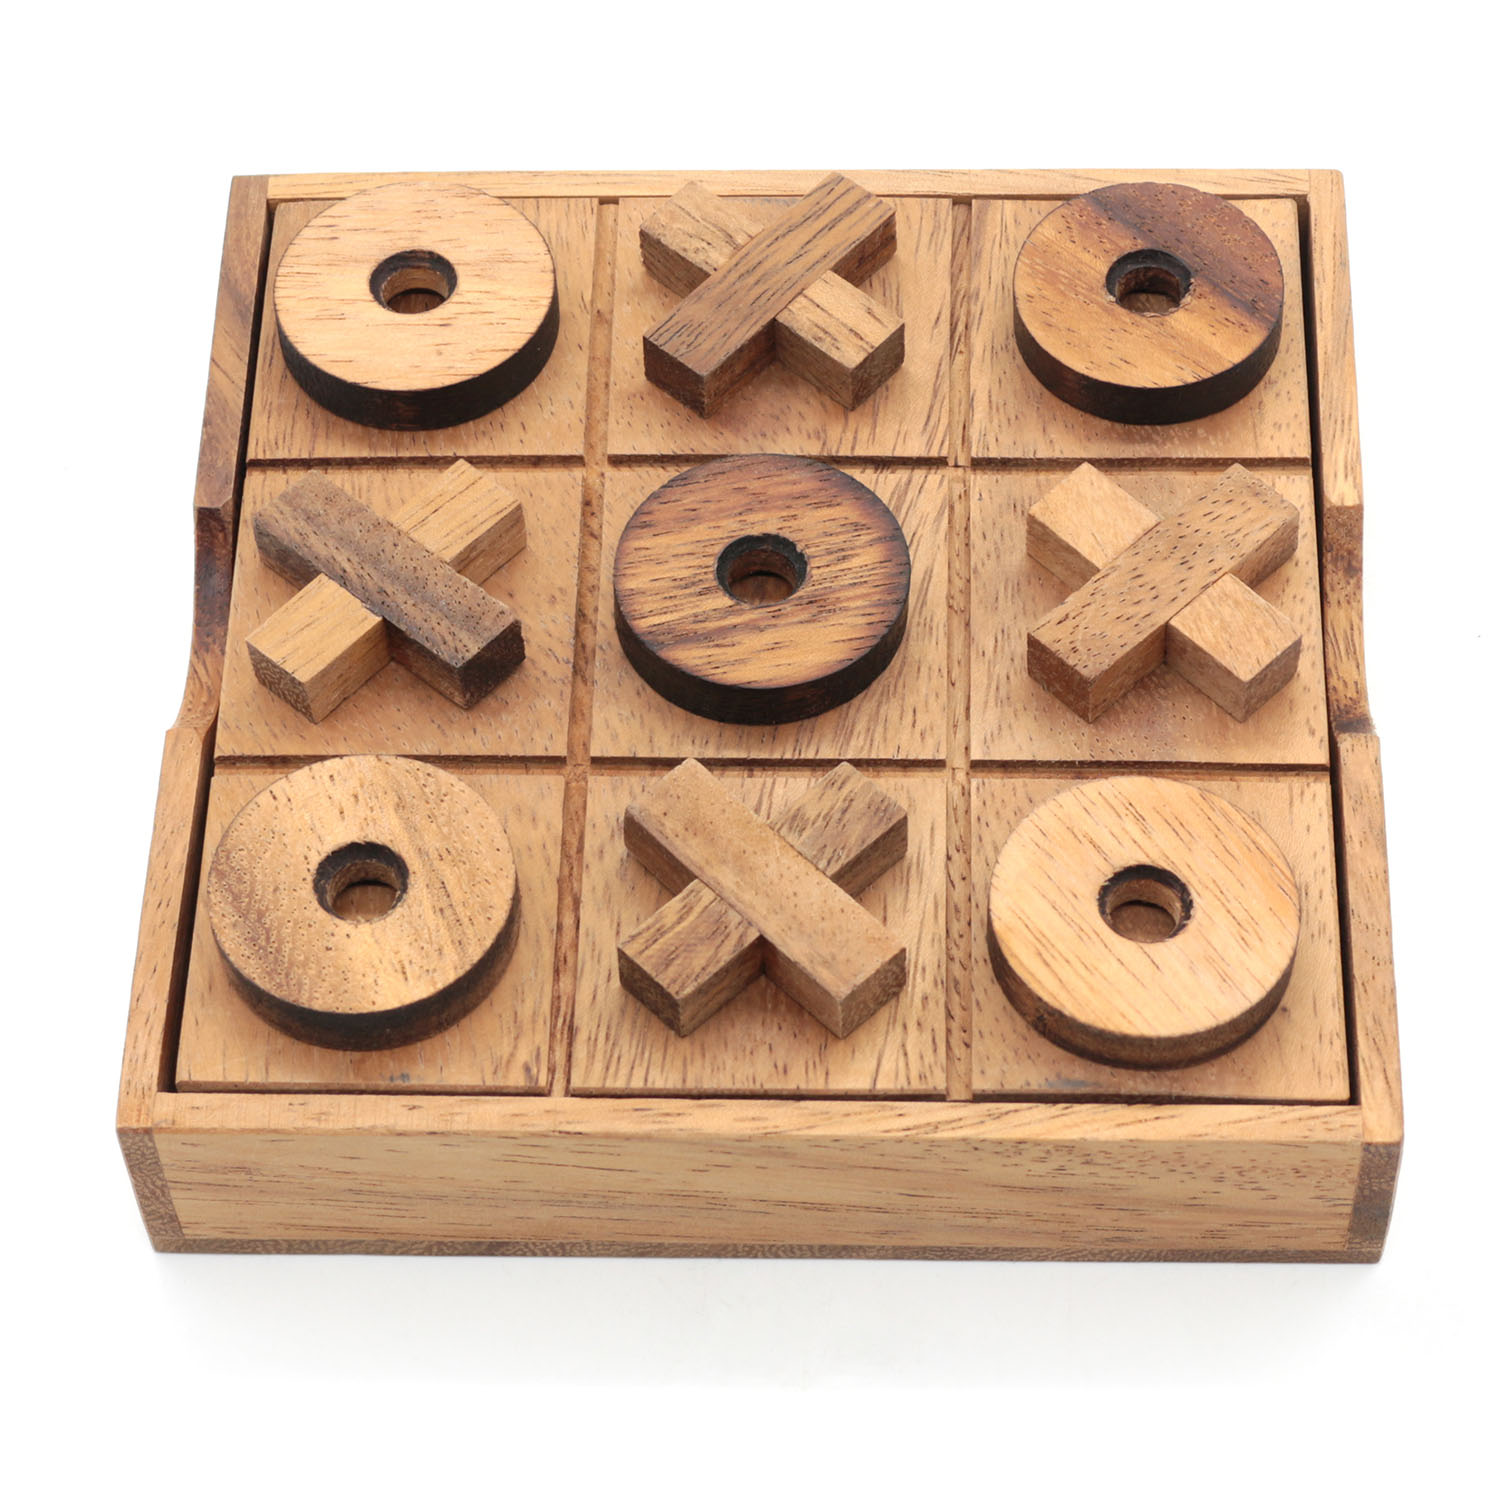 BSIRI XO Blocks (L) Tic Tac Toe Board Games-Ideal for Kids Games, Family  Games and Game Night for Adults, Farmhouse Decor for Coffee Table Decor